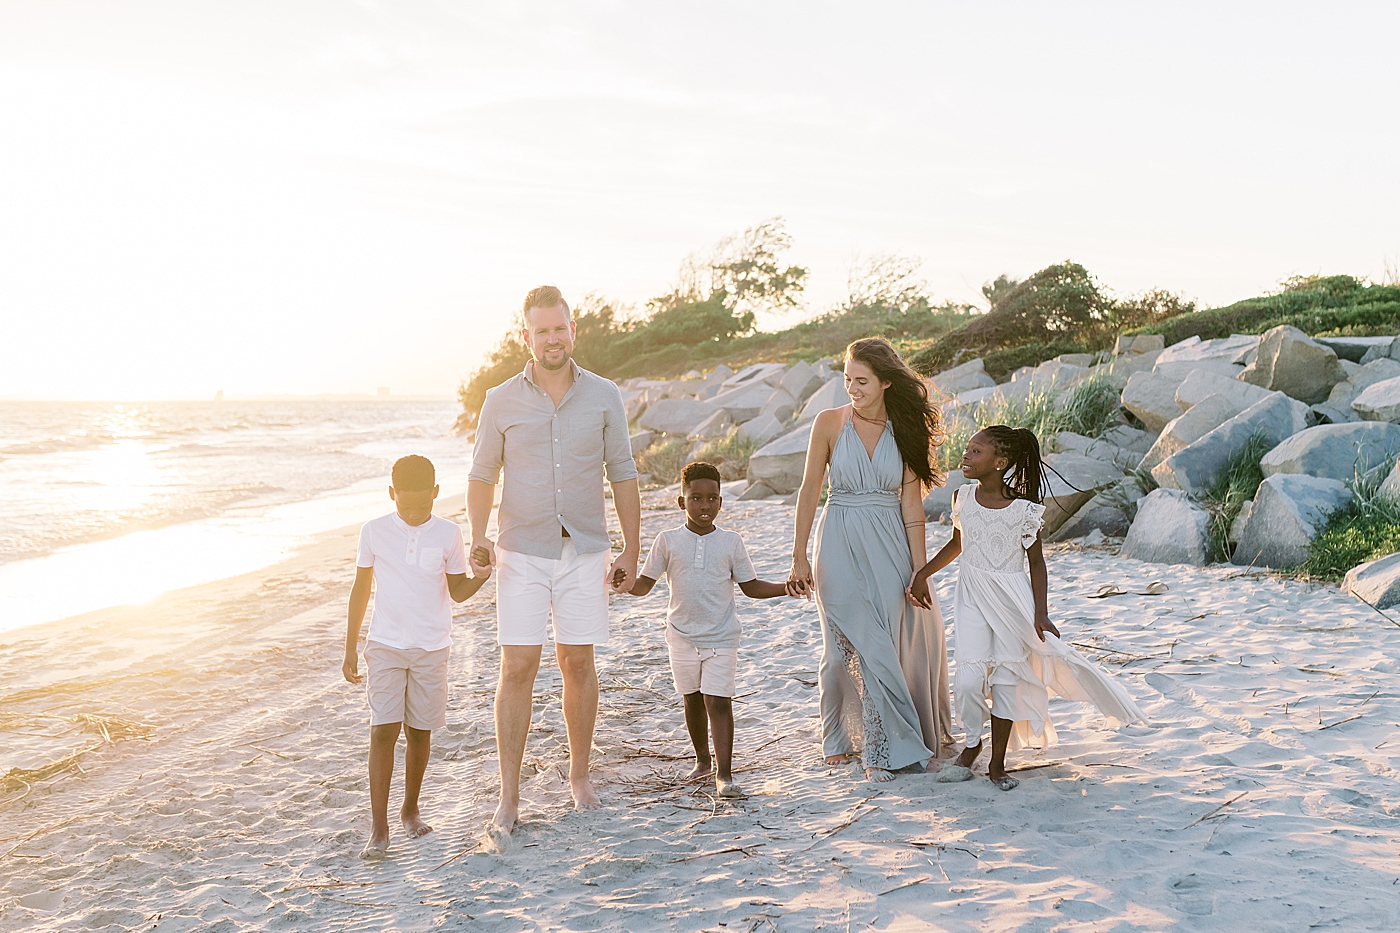 Family of five walking on the beach | Image by Caitlyn Motycka